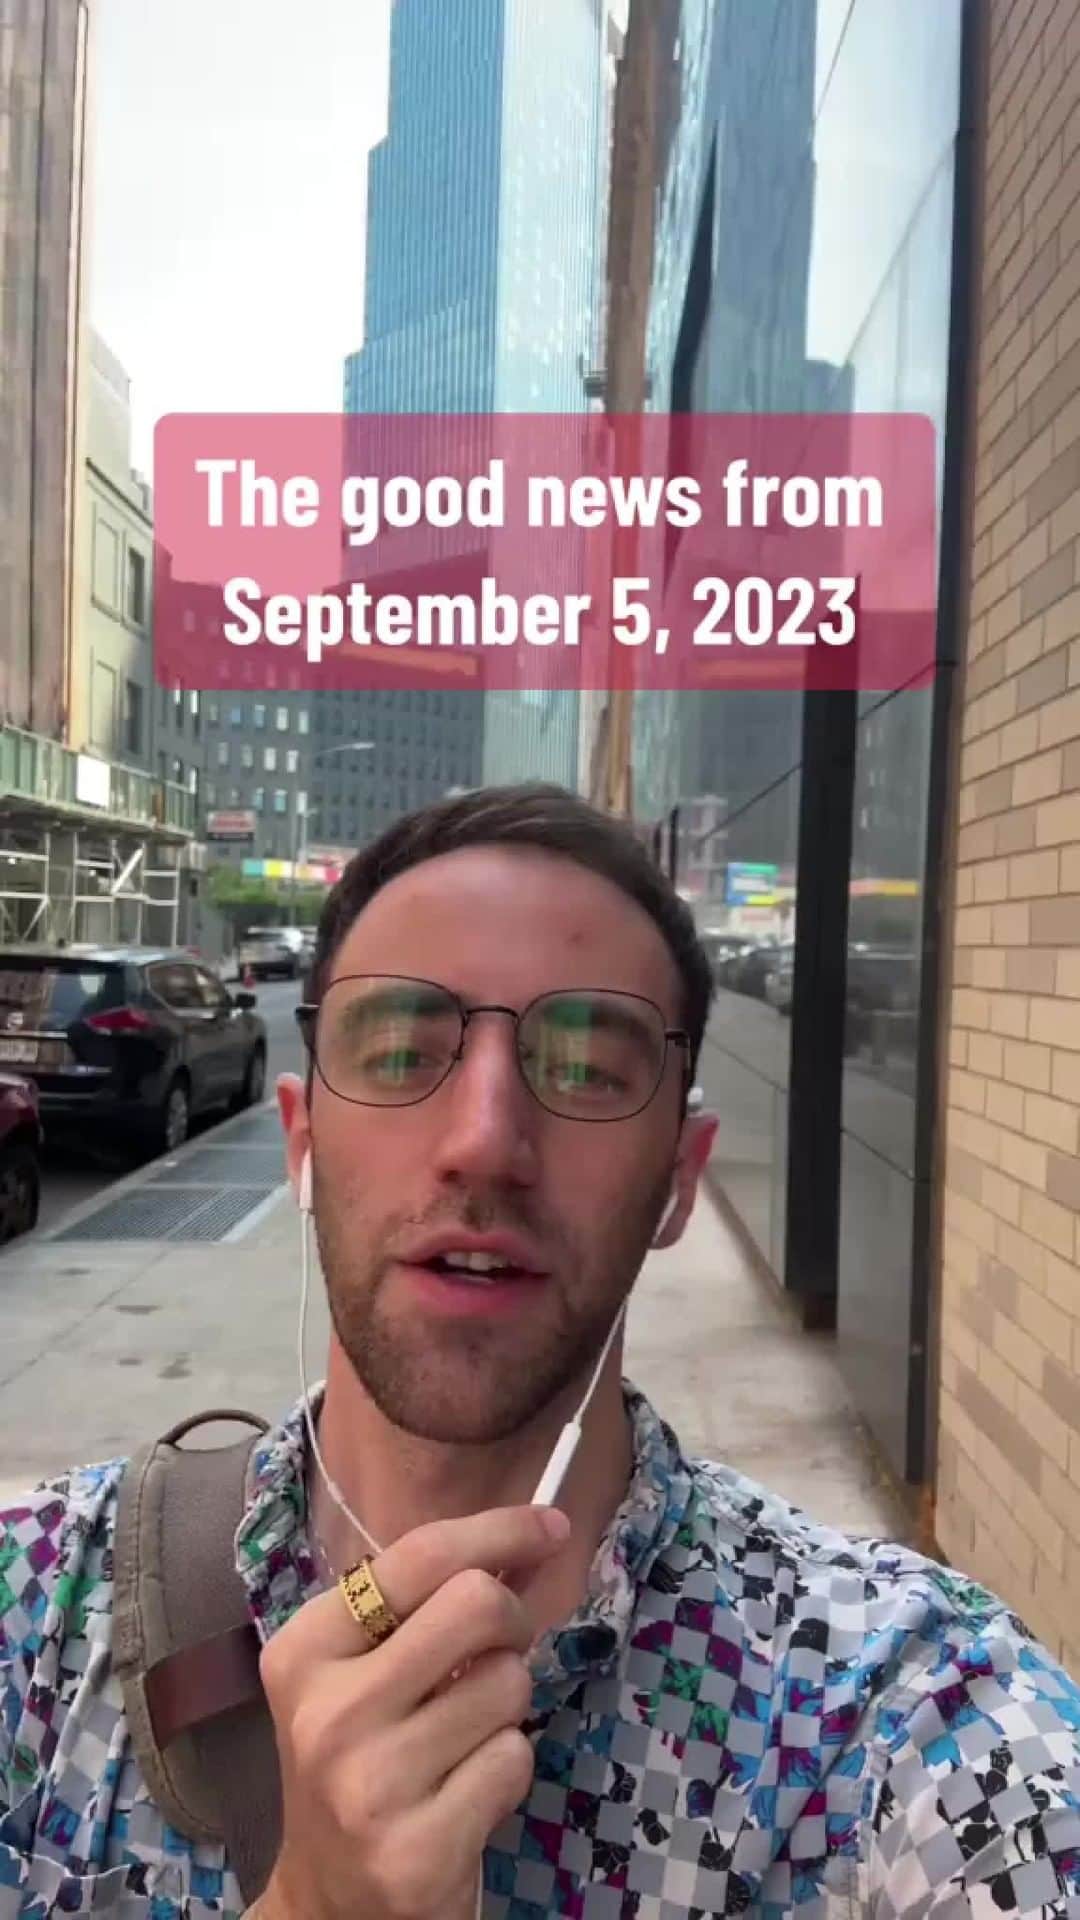 Jacob Simonのインスタグラム：「What’s some good that you’re celebrating today? #ftfaot #forthefirstandonlytime #goodnews #september5 (music: Di Stefano, sources: climativity)」